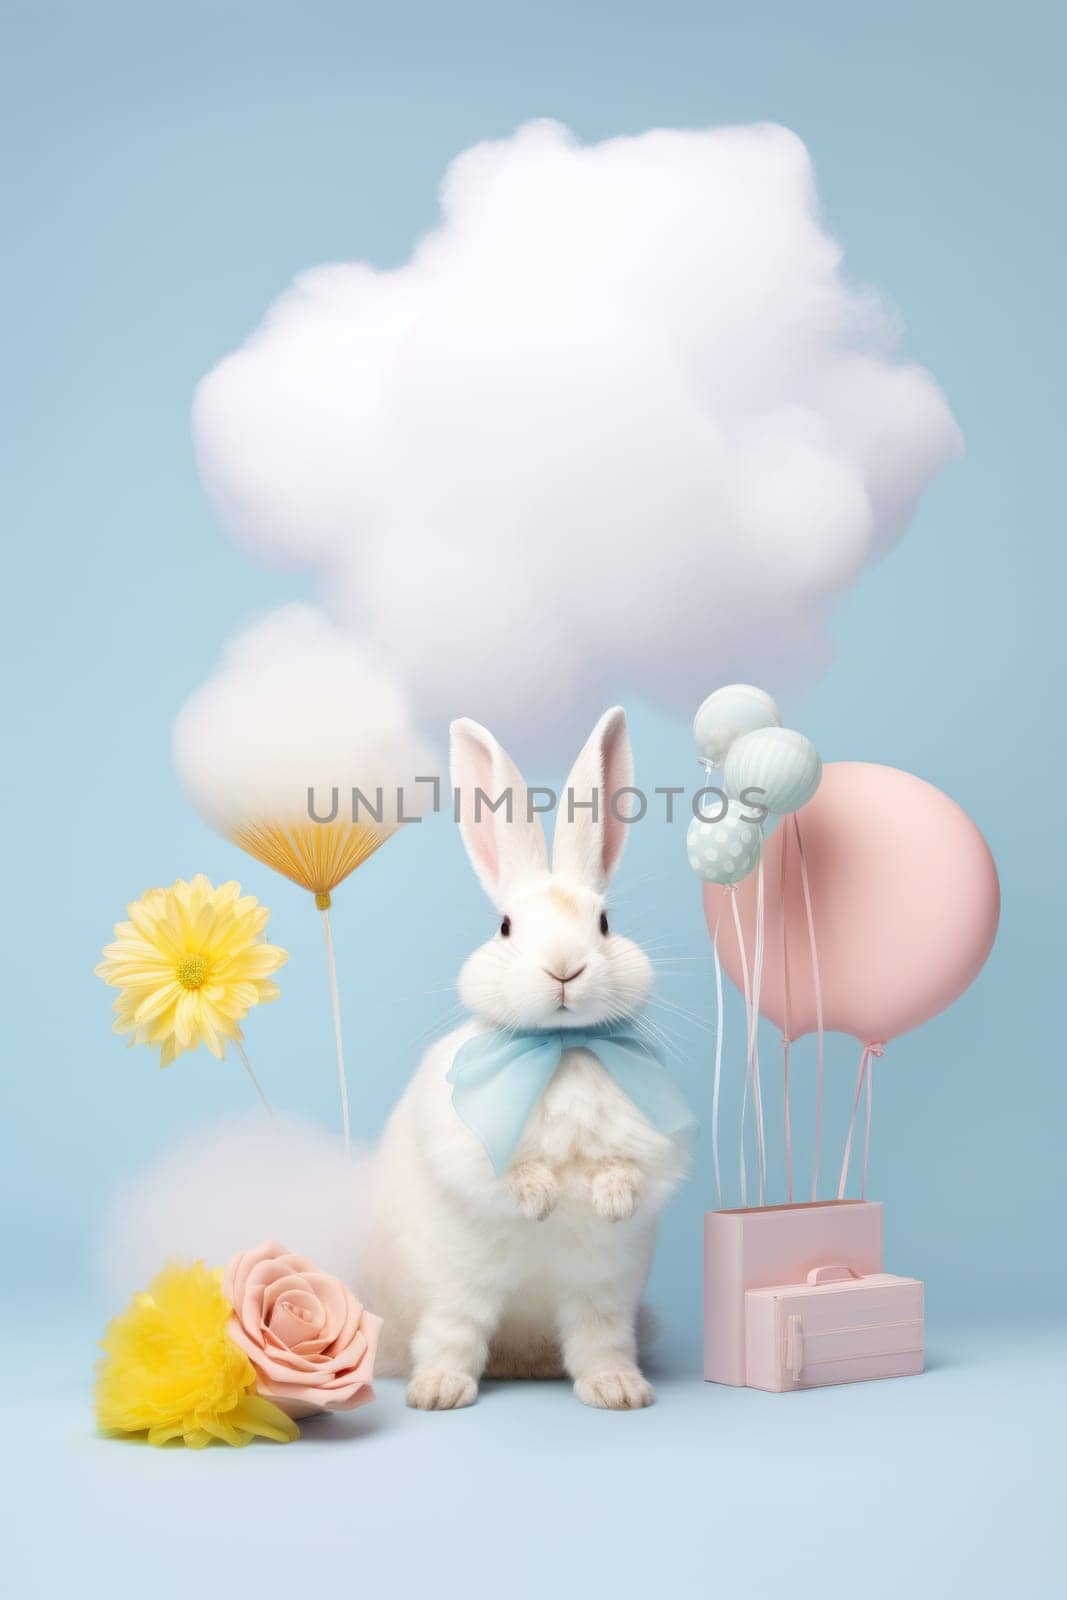 A white rabbit with a blue bow and some balloons, AI by starush